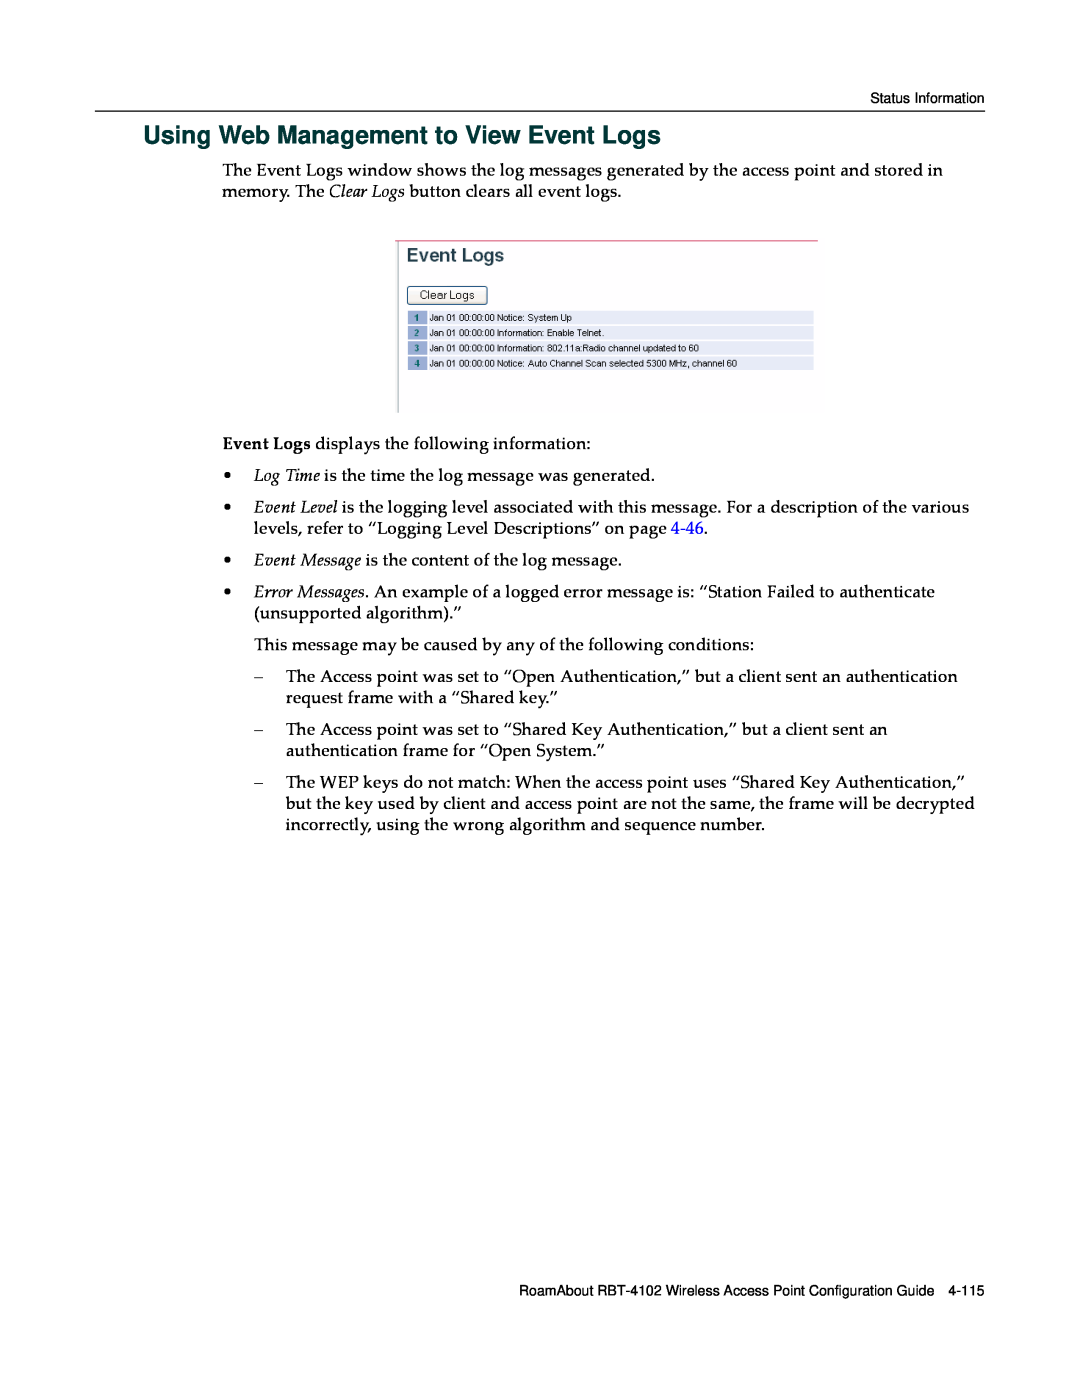 Enterasys Networks RBT-4102 manual Using Web Management to View Event Logs 